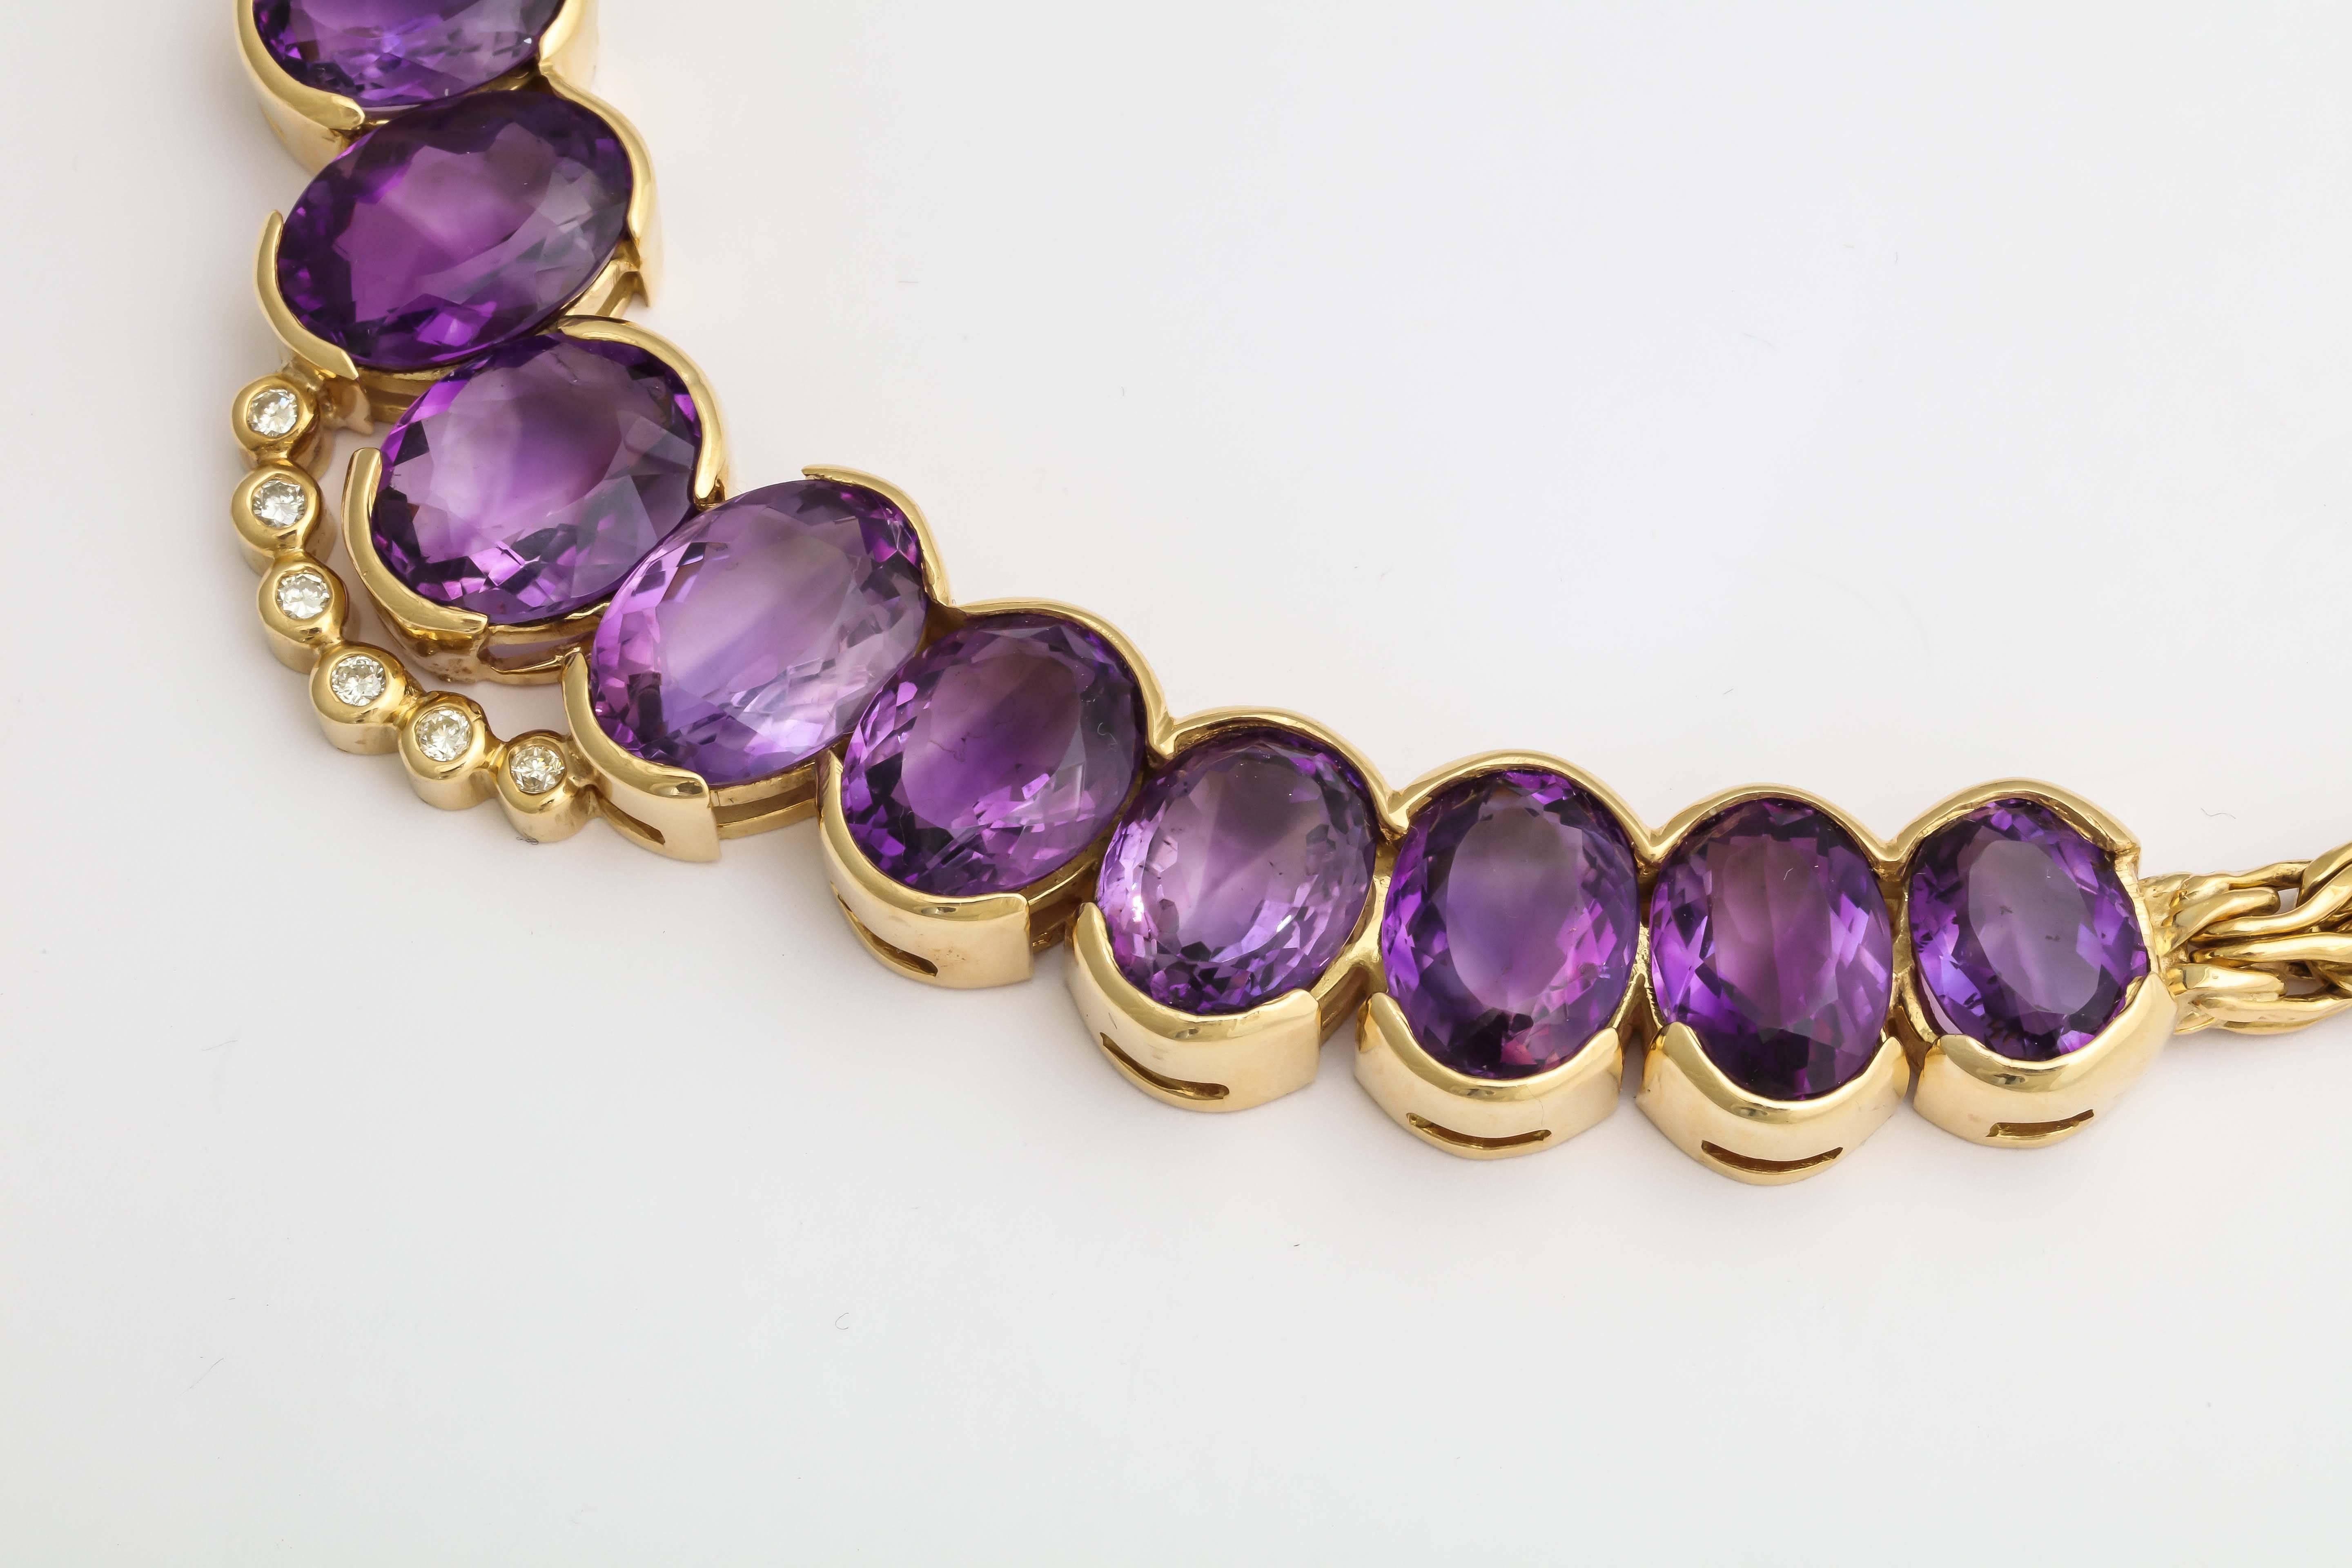 Roberto coin 1980s Amethyst Diamond Gold Collar Necklace With Sapphire Clasp For Sale 3